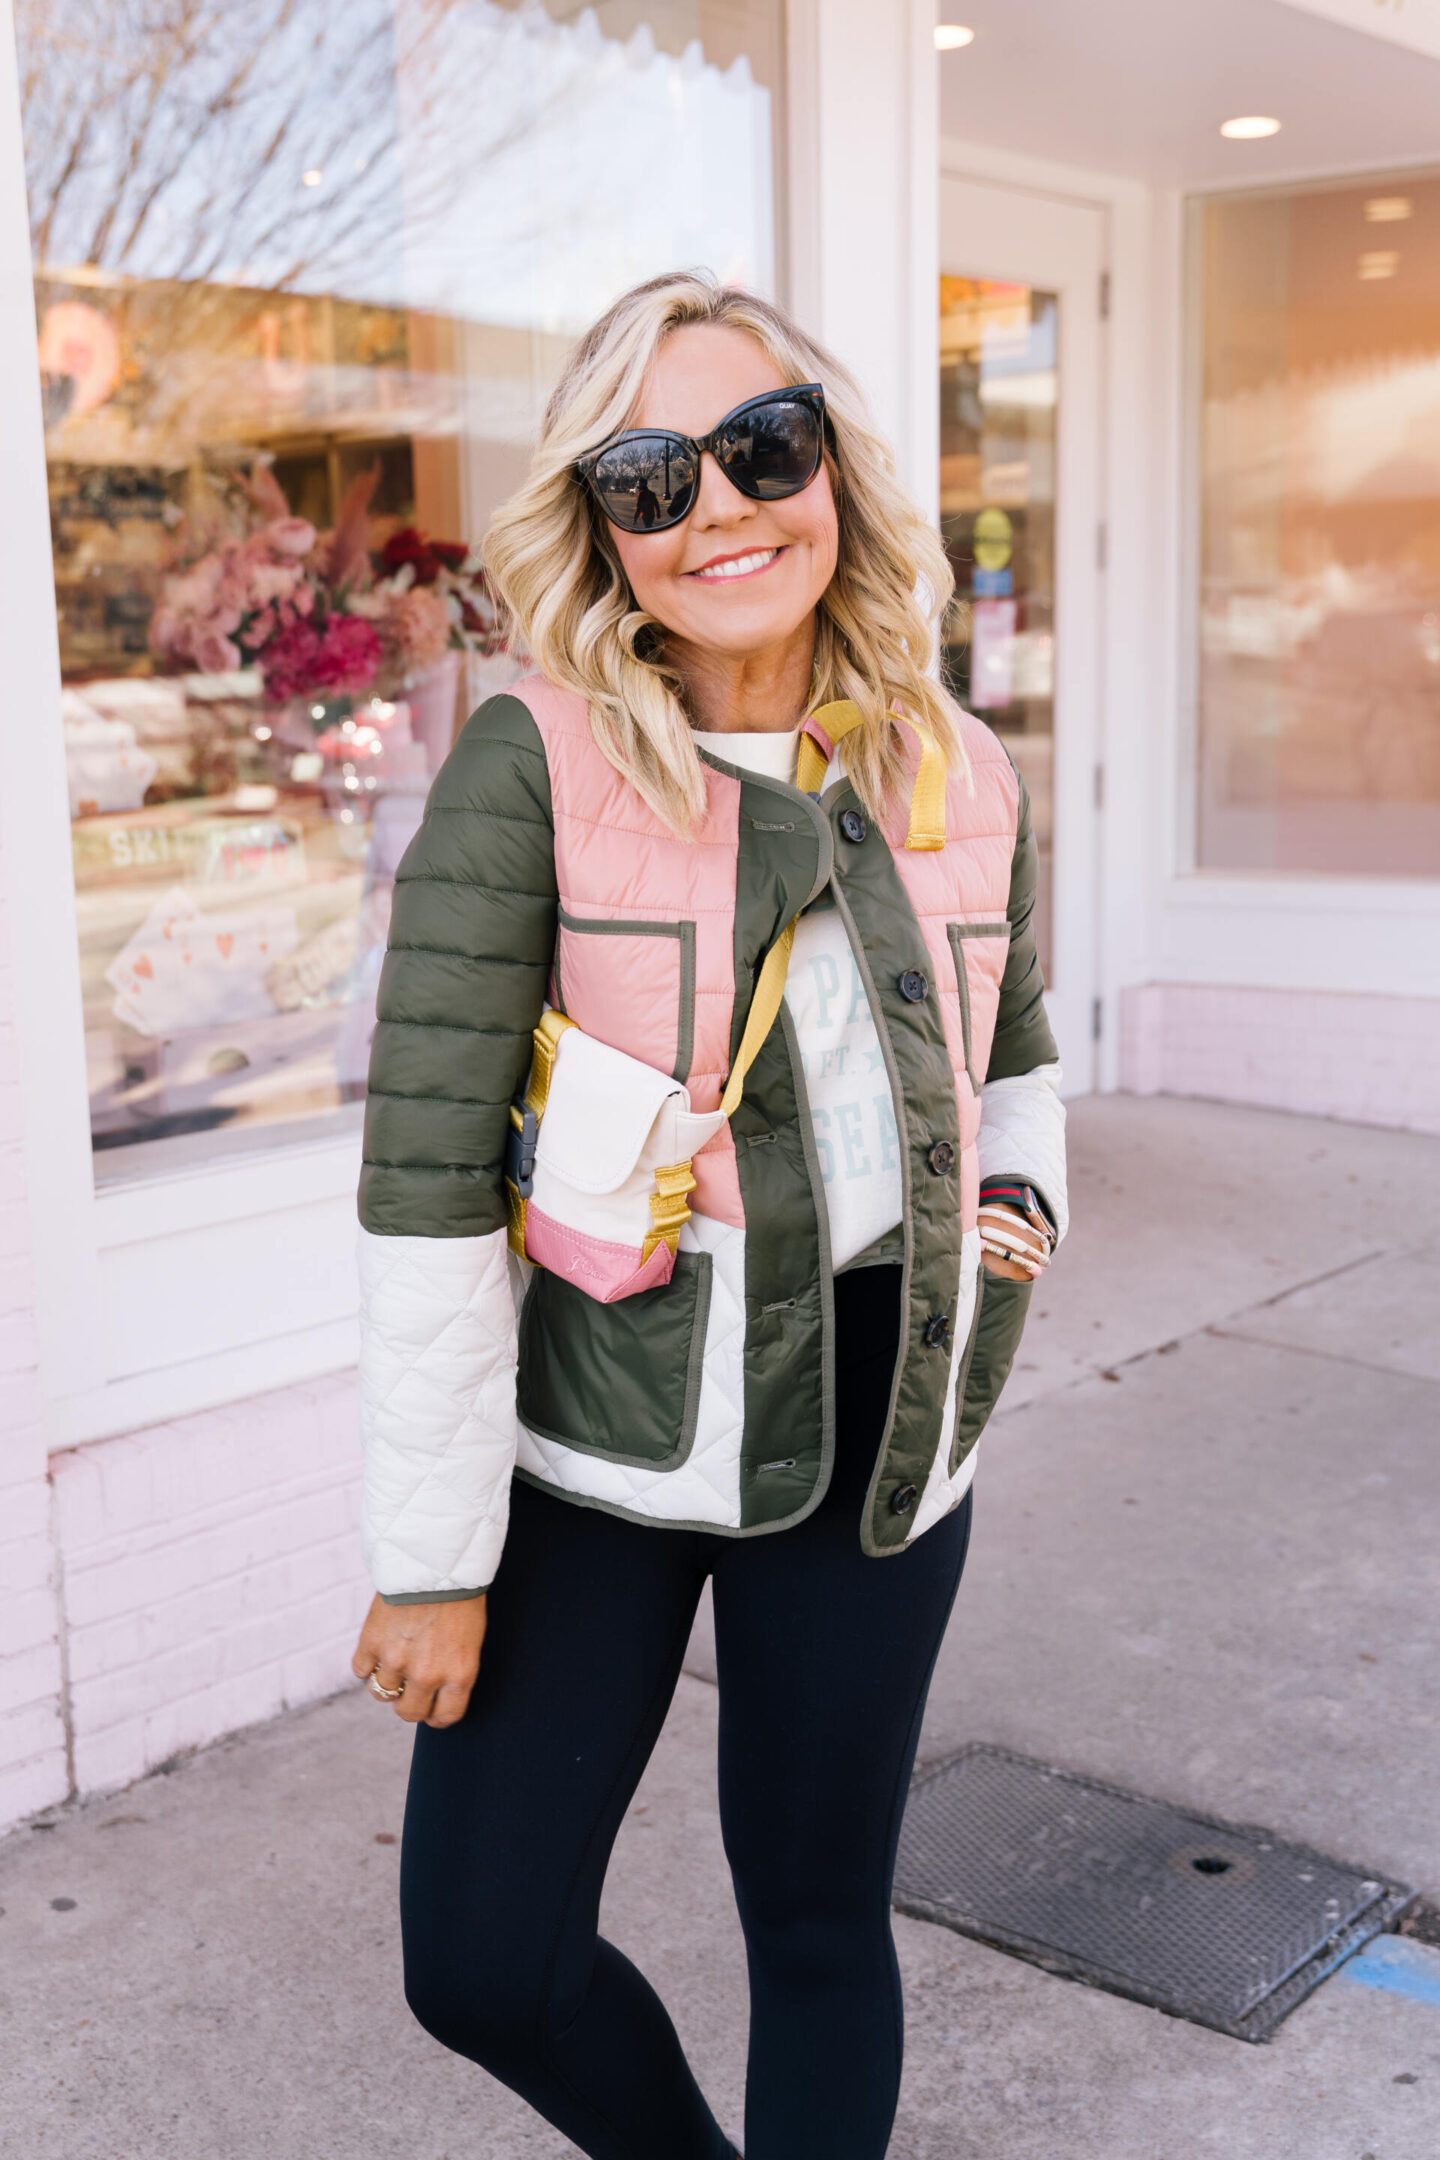 jcrew athleisure for her featured by top Nashville fashion blogger, Hello Happiness.